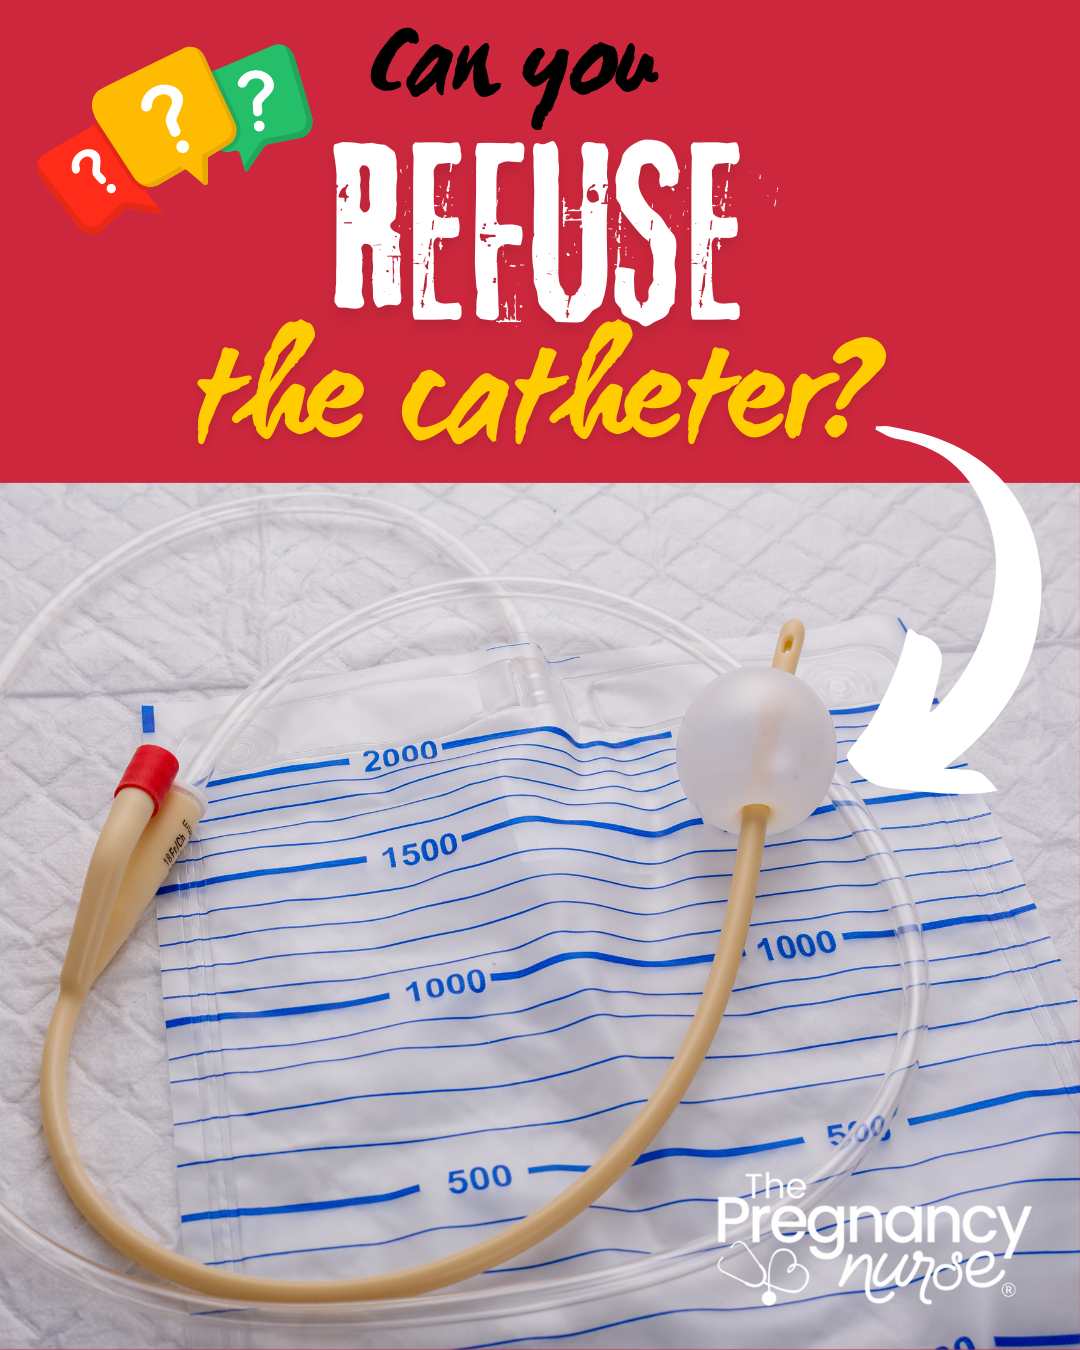 Ever wondered why a urinary catheter is used during labor? Dive deep into the reasons, risks and your rights in refusing. Find out about alternatives and more, all from an experienced labor and delivery nurse.